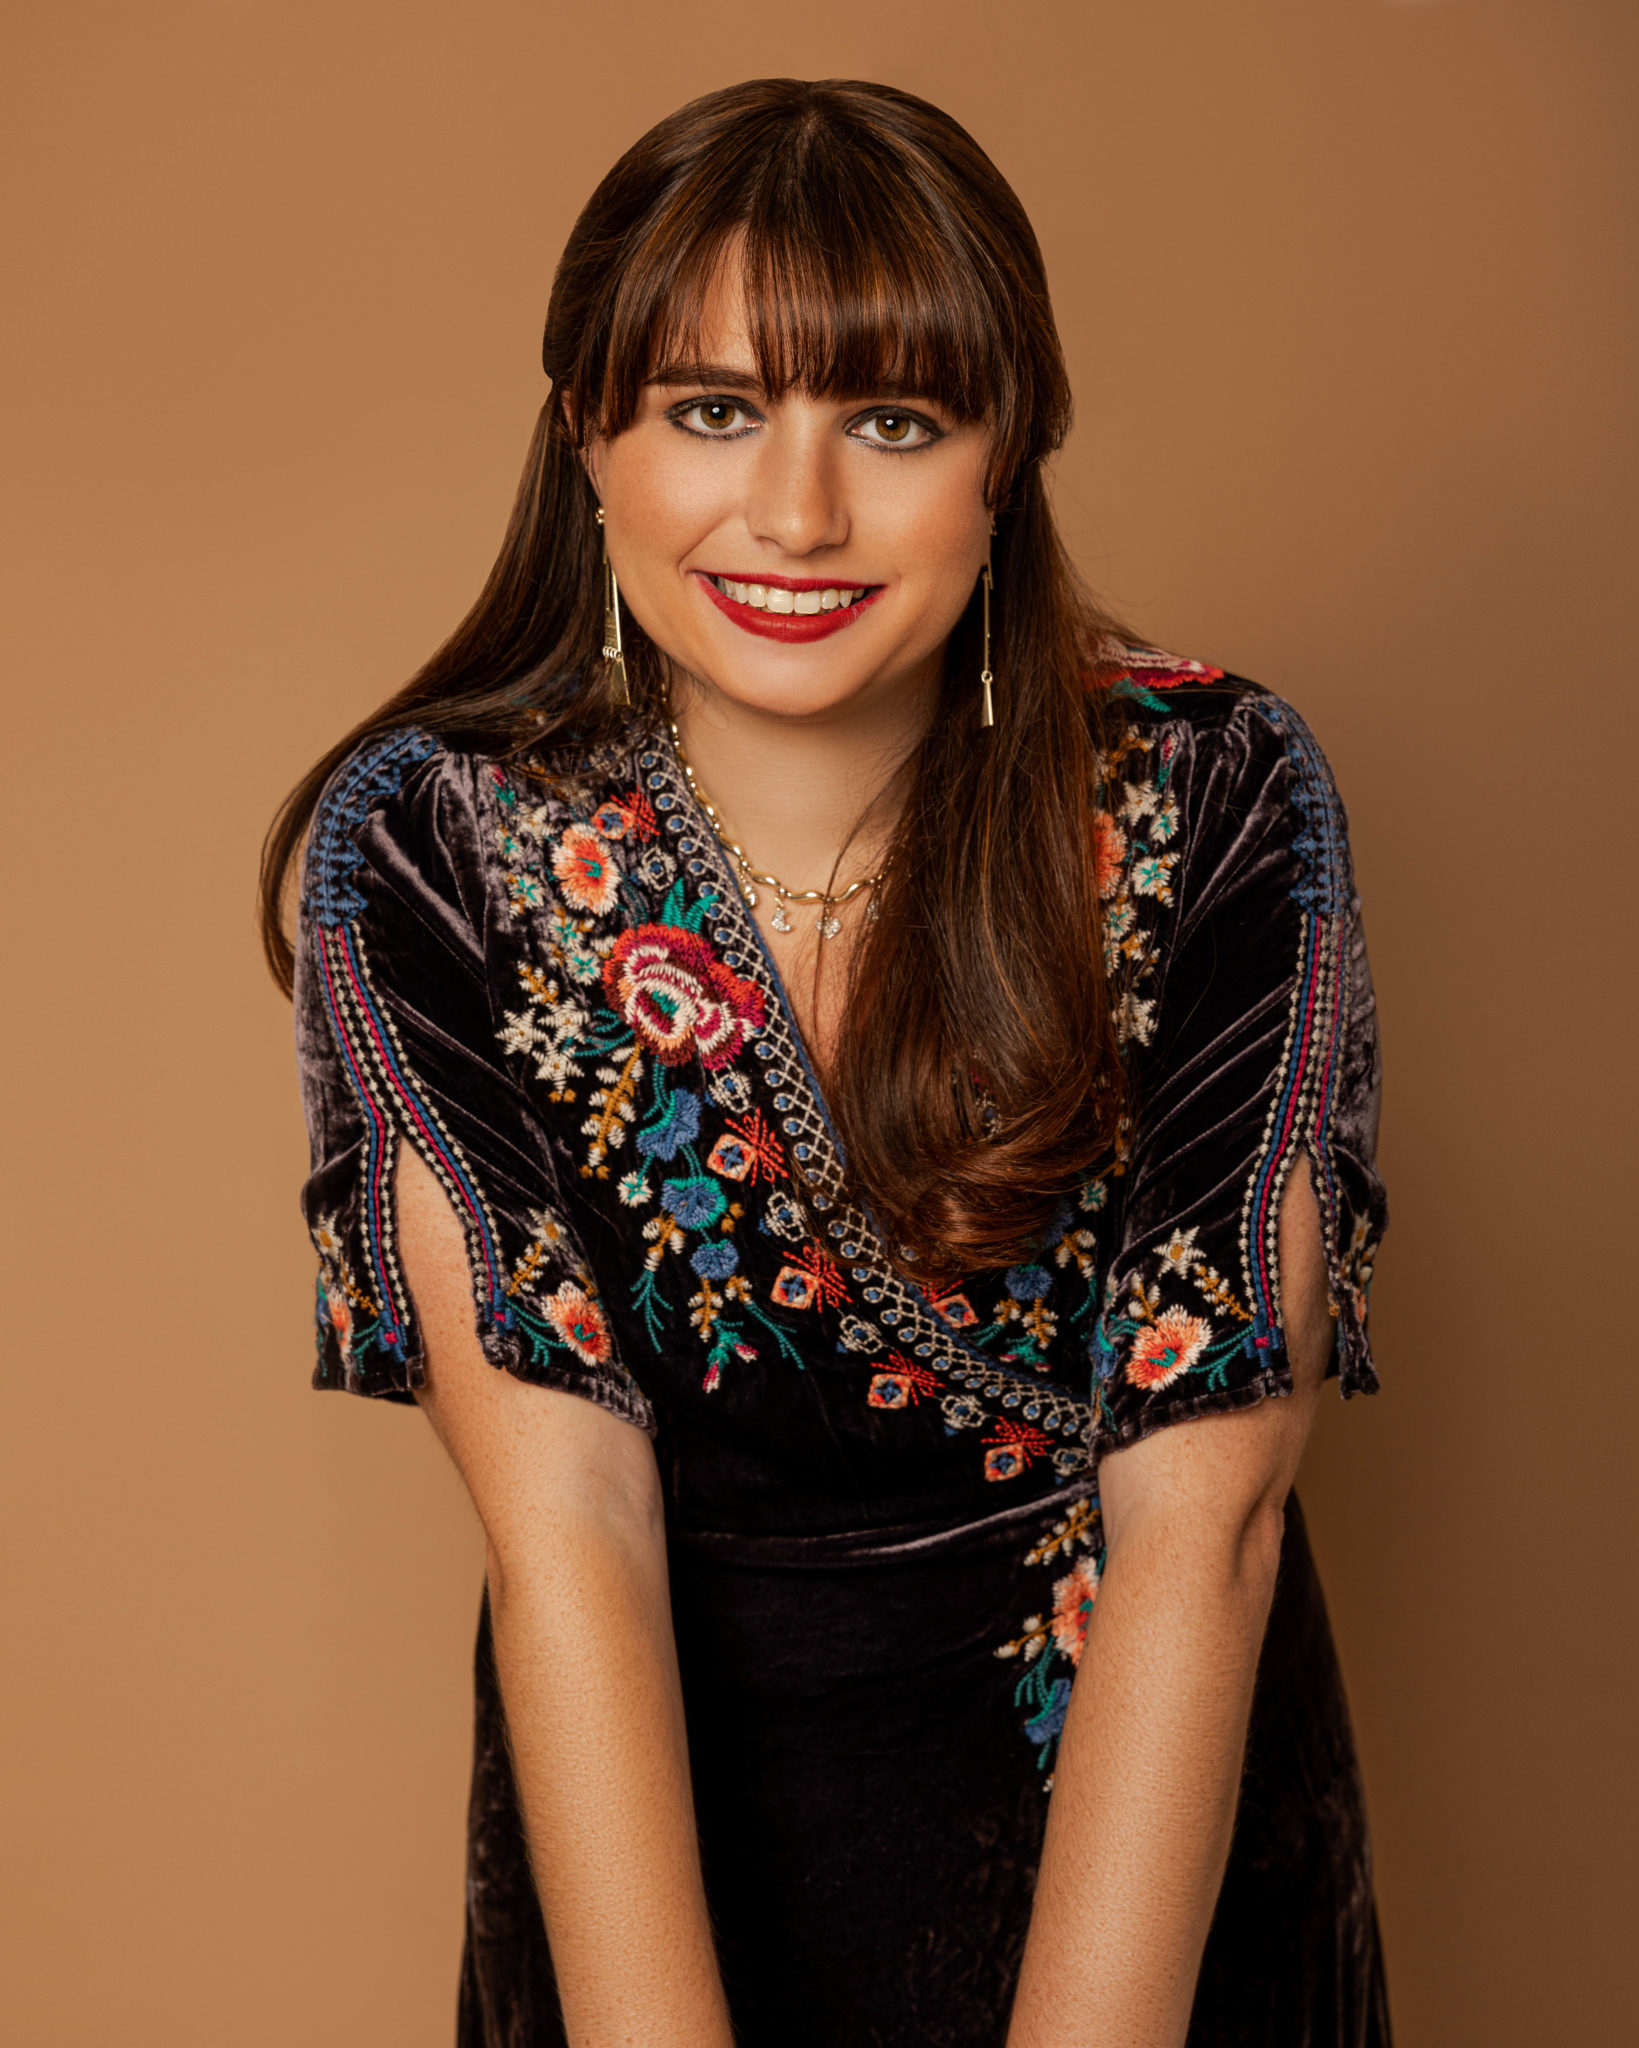 Haley Moss: Pictured is a female in her 20's with dark brown hair, bangs, and a boho-style black dress with colorful embroidering around the neckline